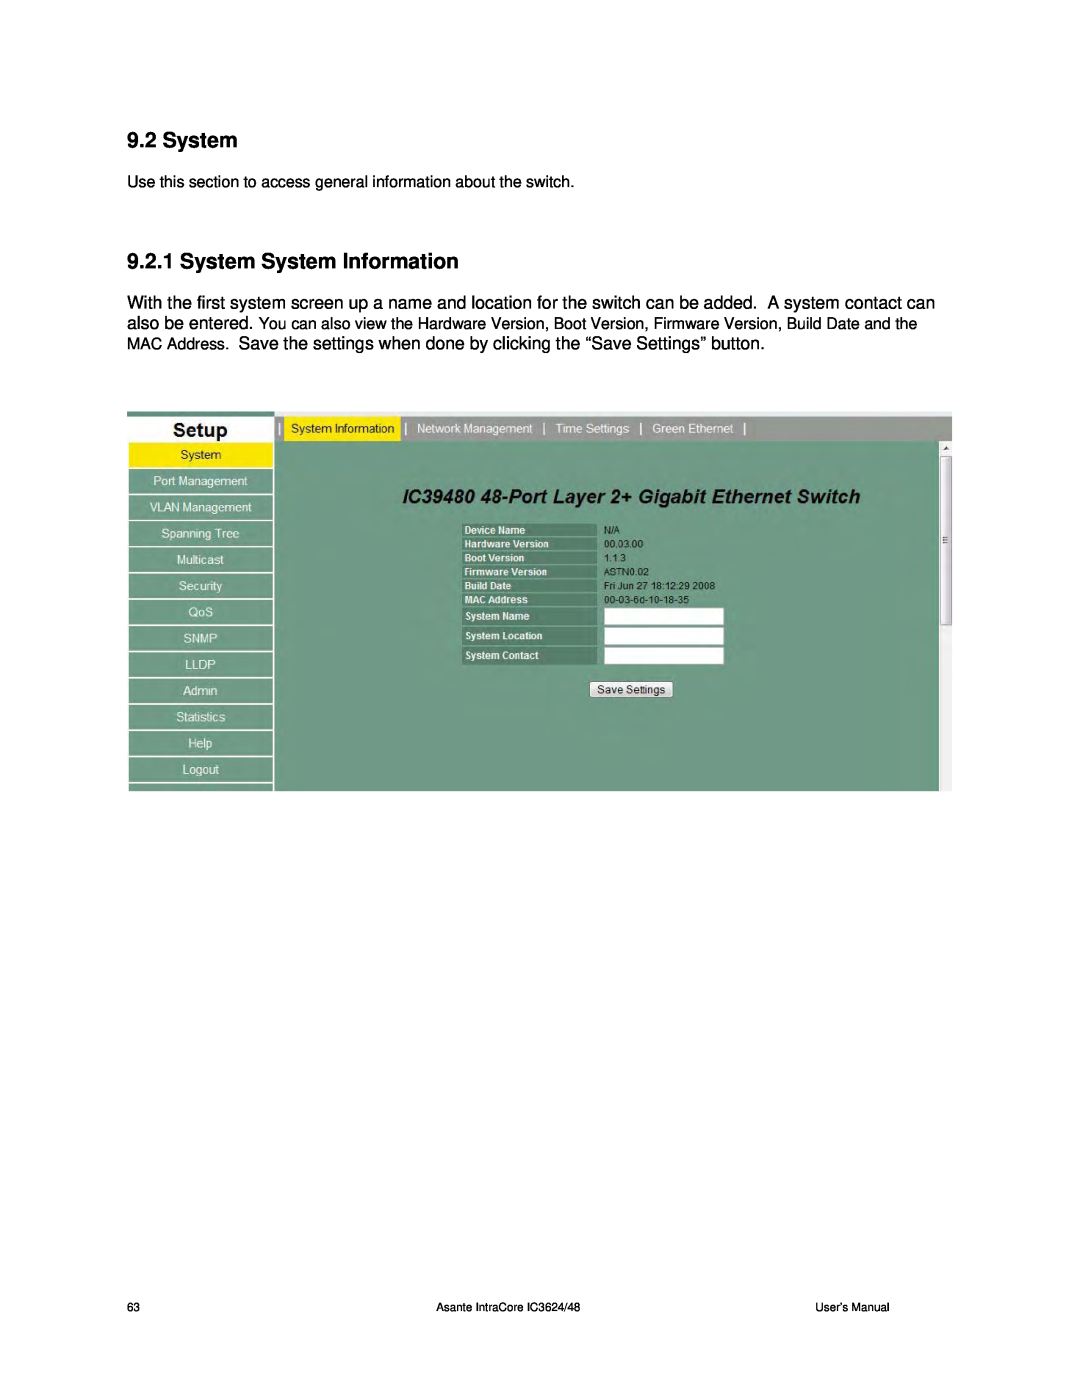 Asante Technologies user manual System System Information, Asante IntraCore IC3624/48, User’s Manual 